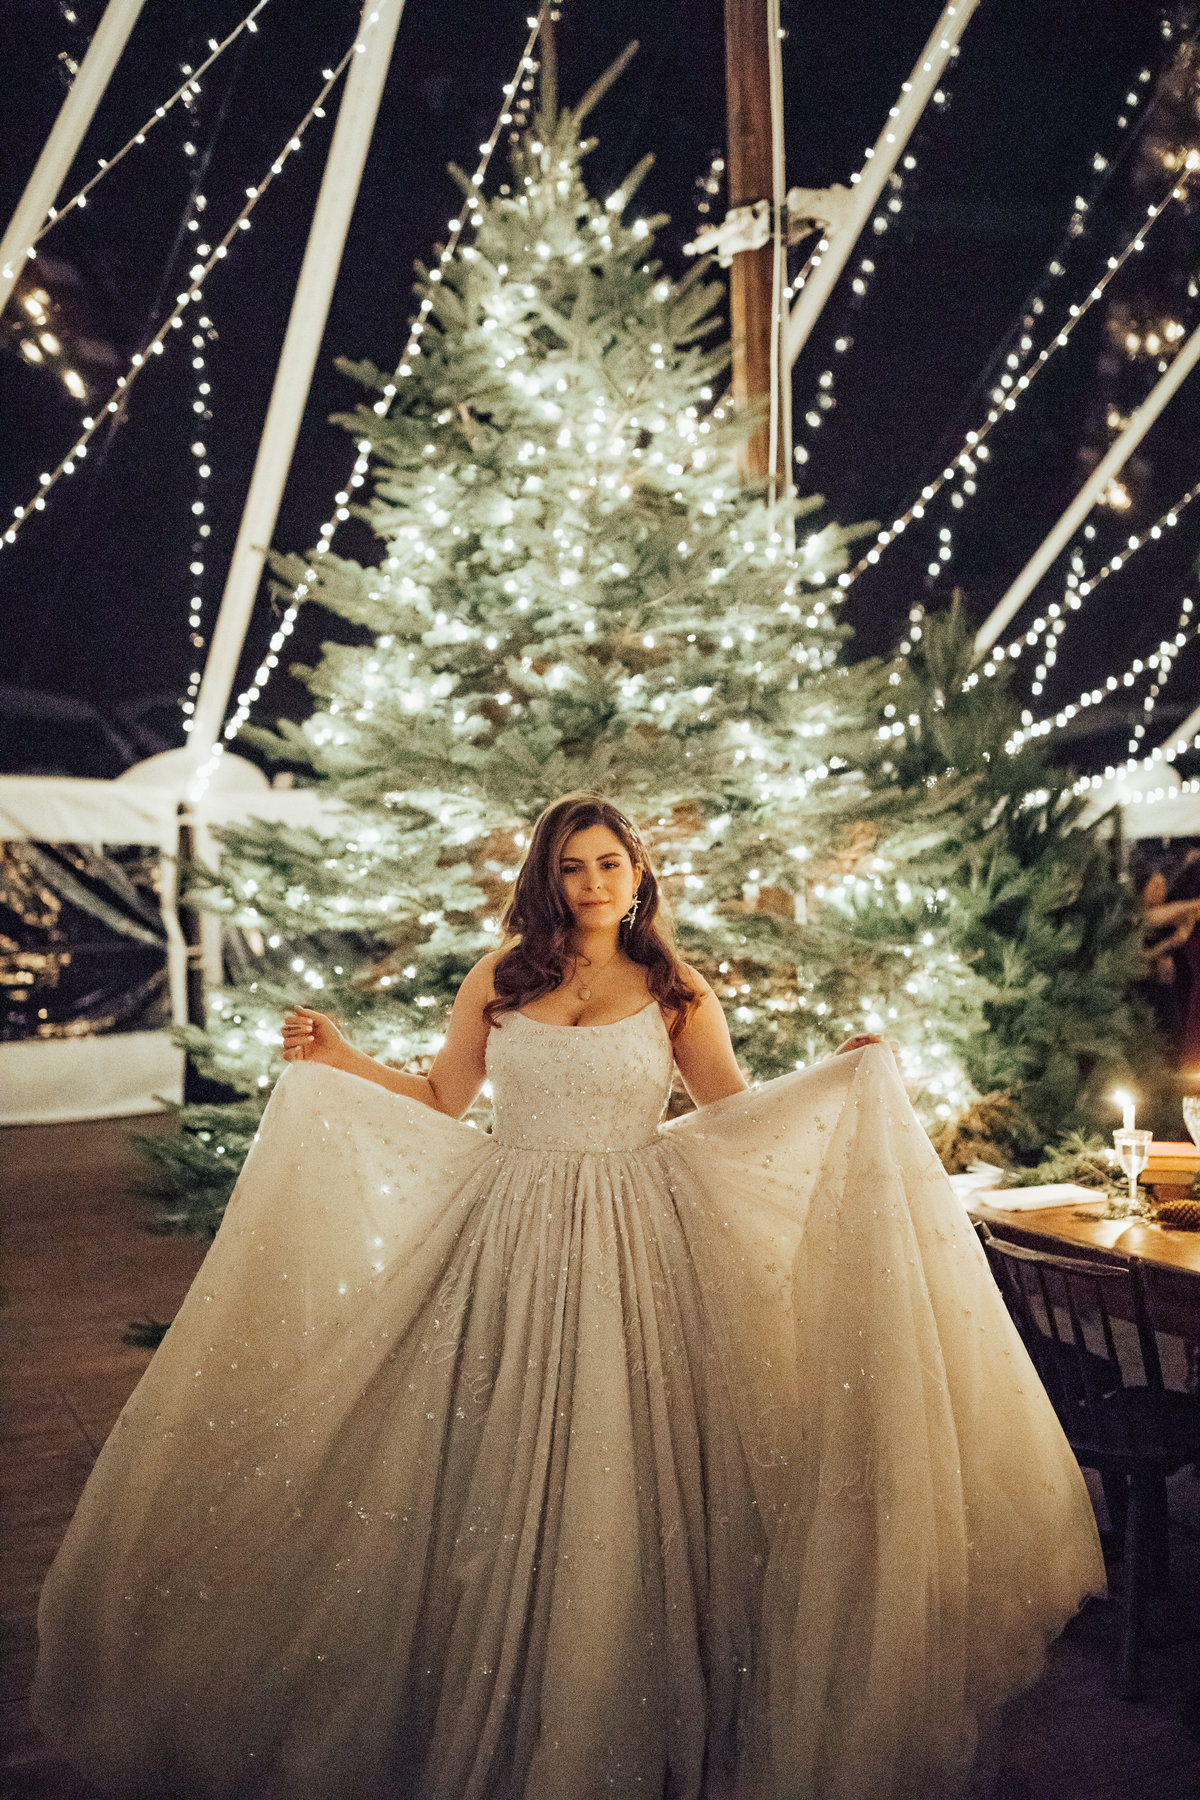 Christy-l-Johnston-Photography-Monica-Relyea-Events-Noelle-Downing-Instagram-Noelle_s-Favorite-Day-Wedding-Battenfelds-Christmas-tree-farm-Red-Hook-New-York-Hudson-Valley-upstate-november-2019-AP1A0062